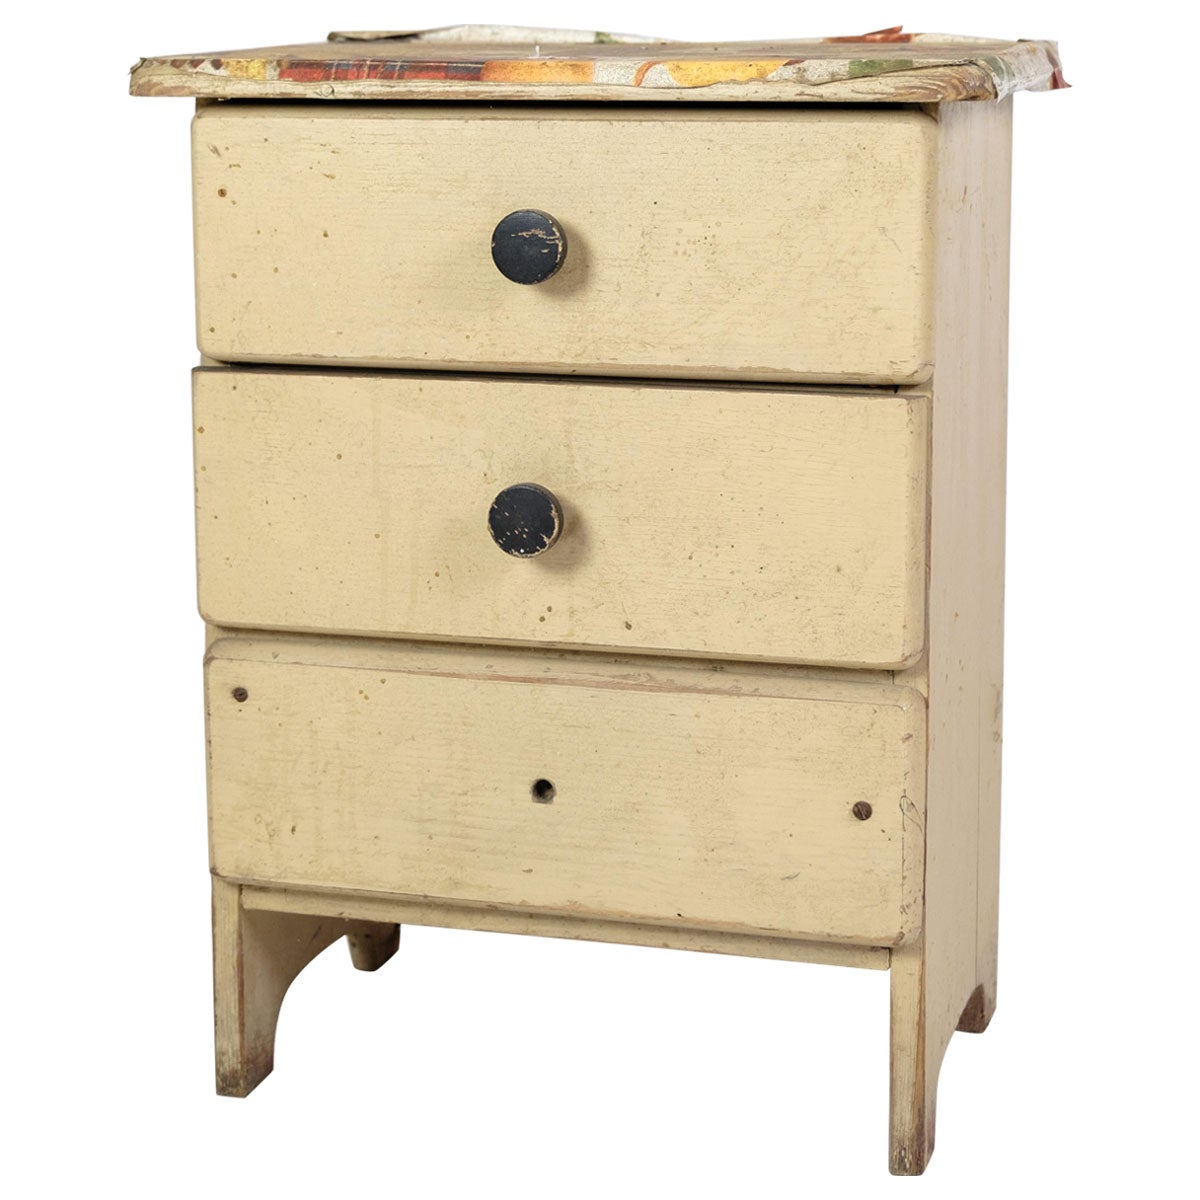 Children's chest of drawers In Painted wood From The 1890